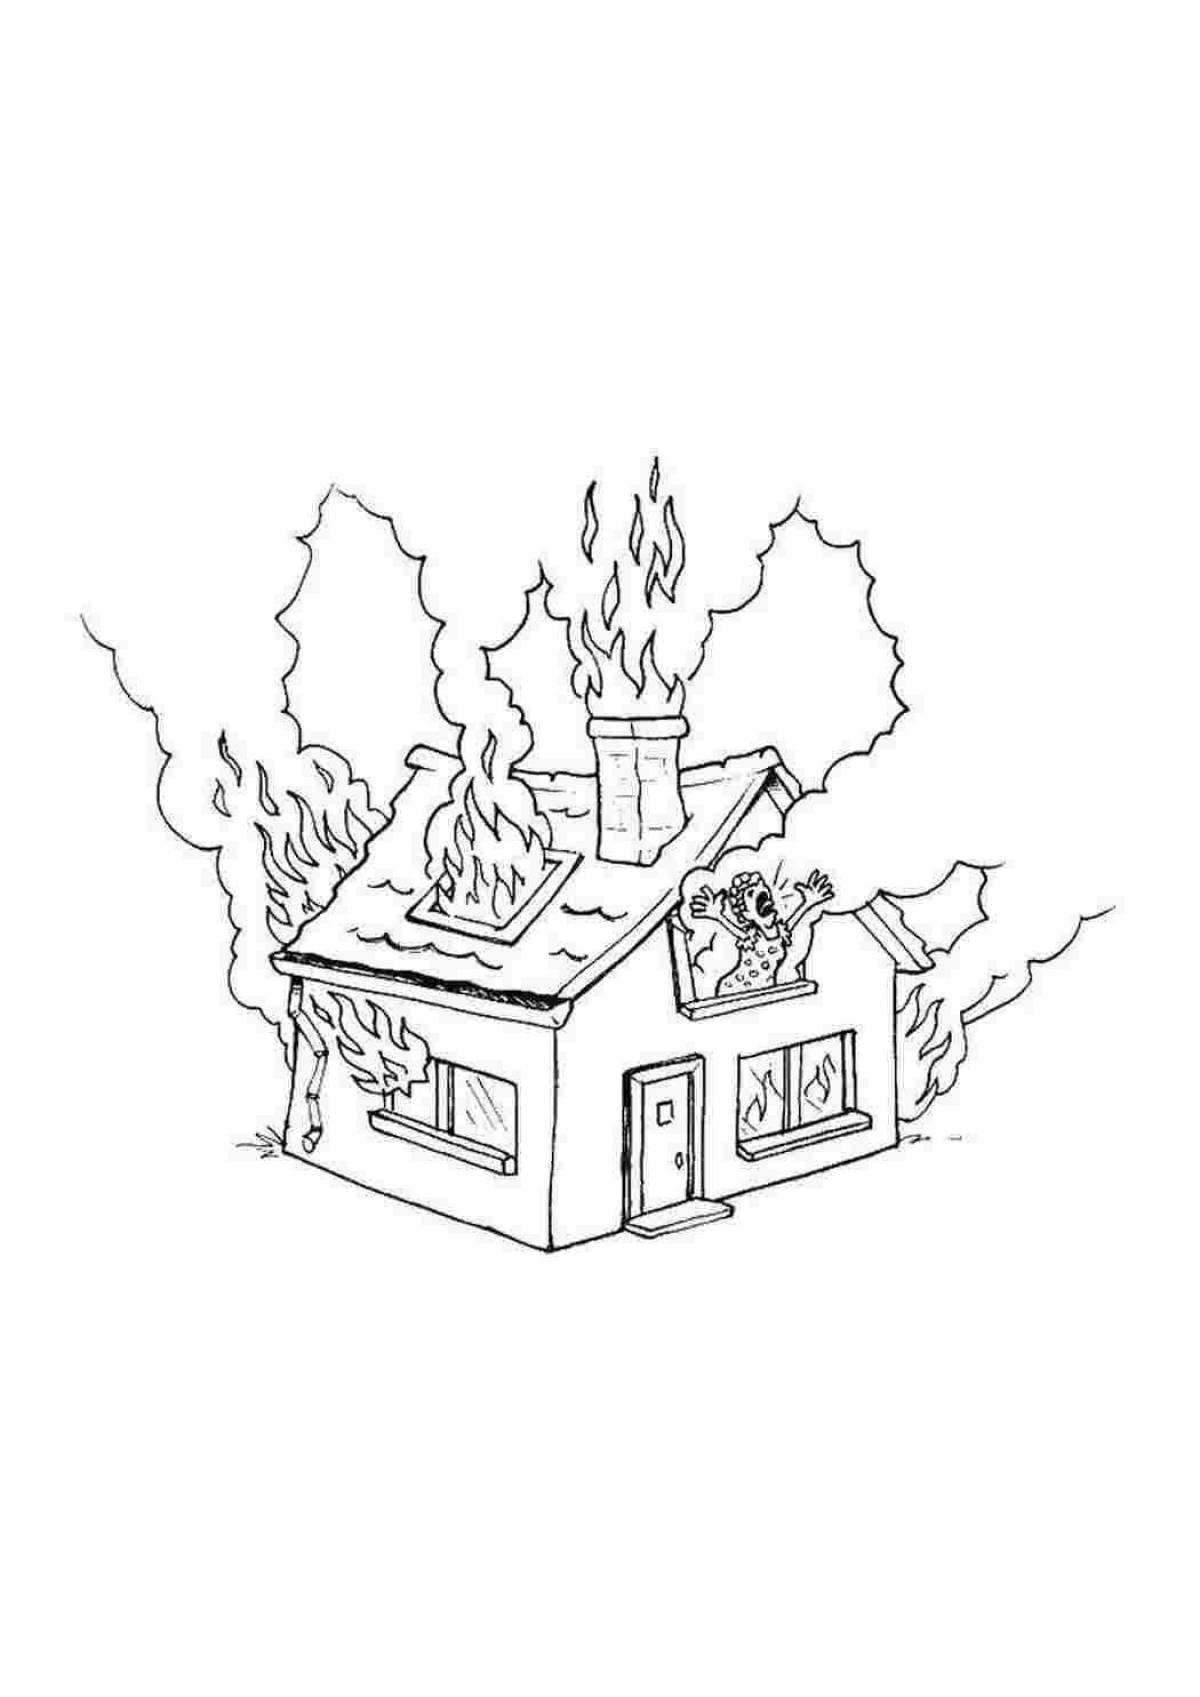 Shiny burning house coloring book for kids